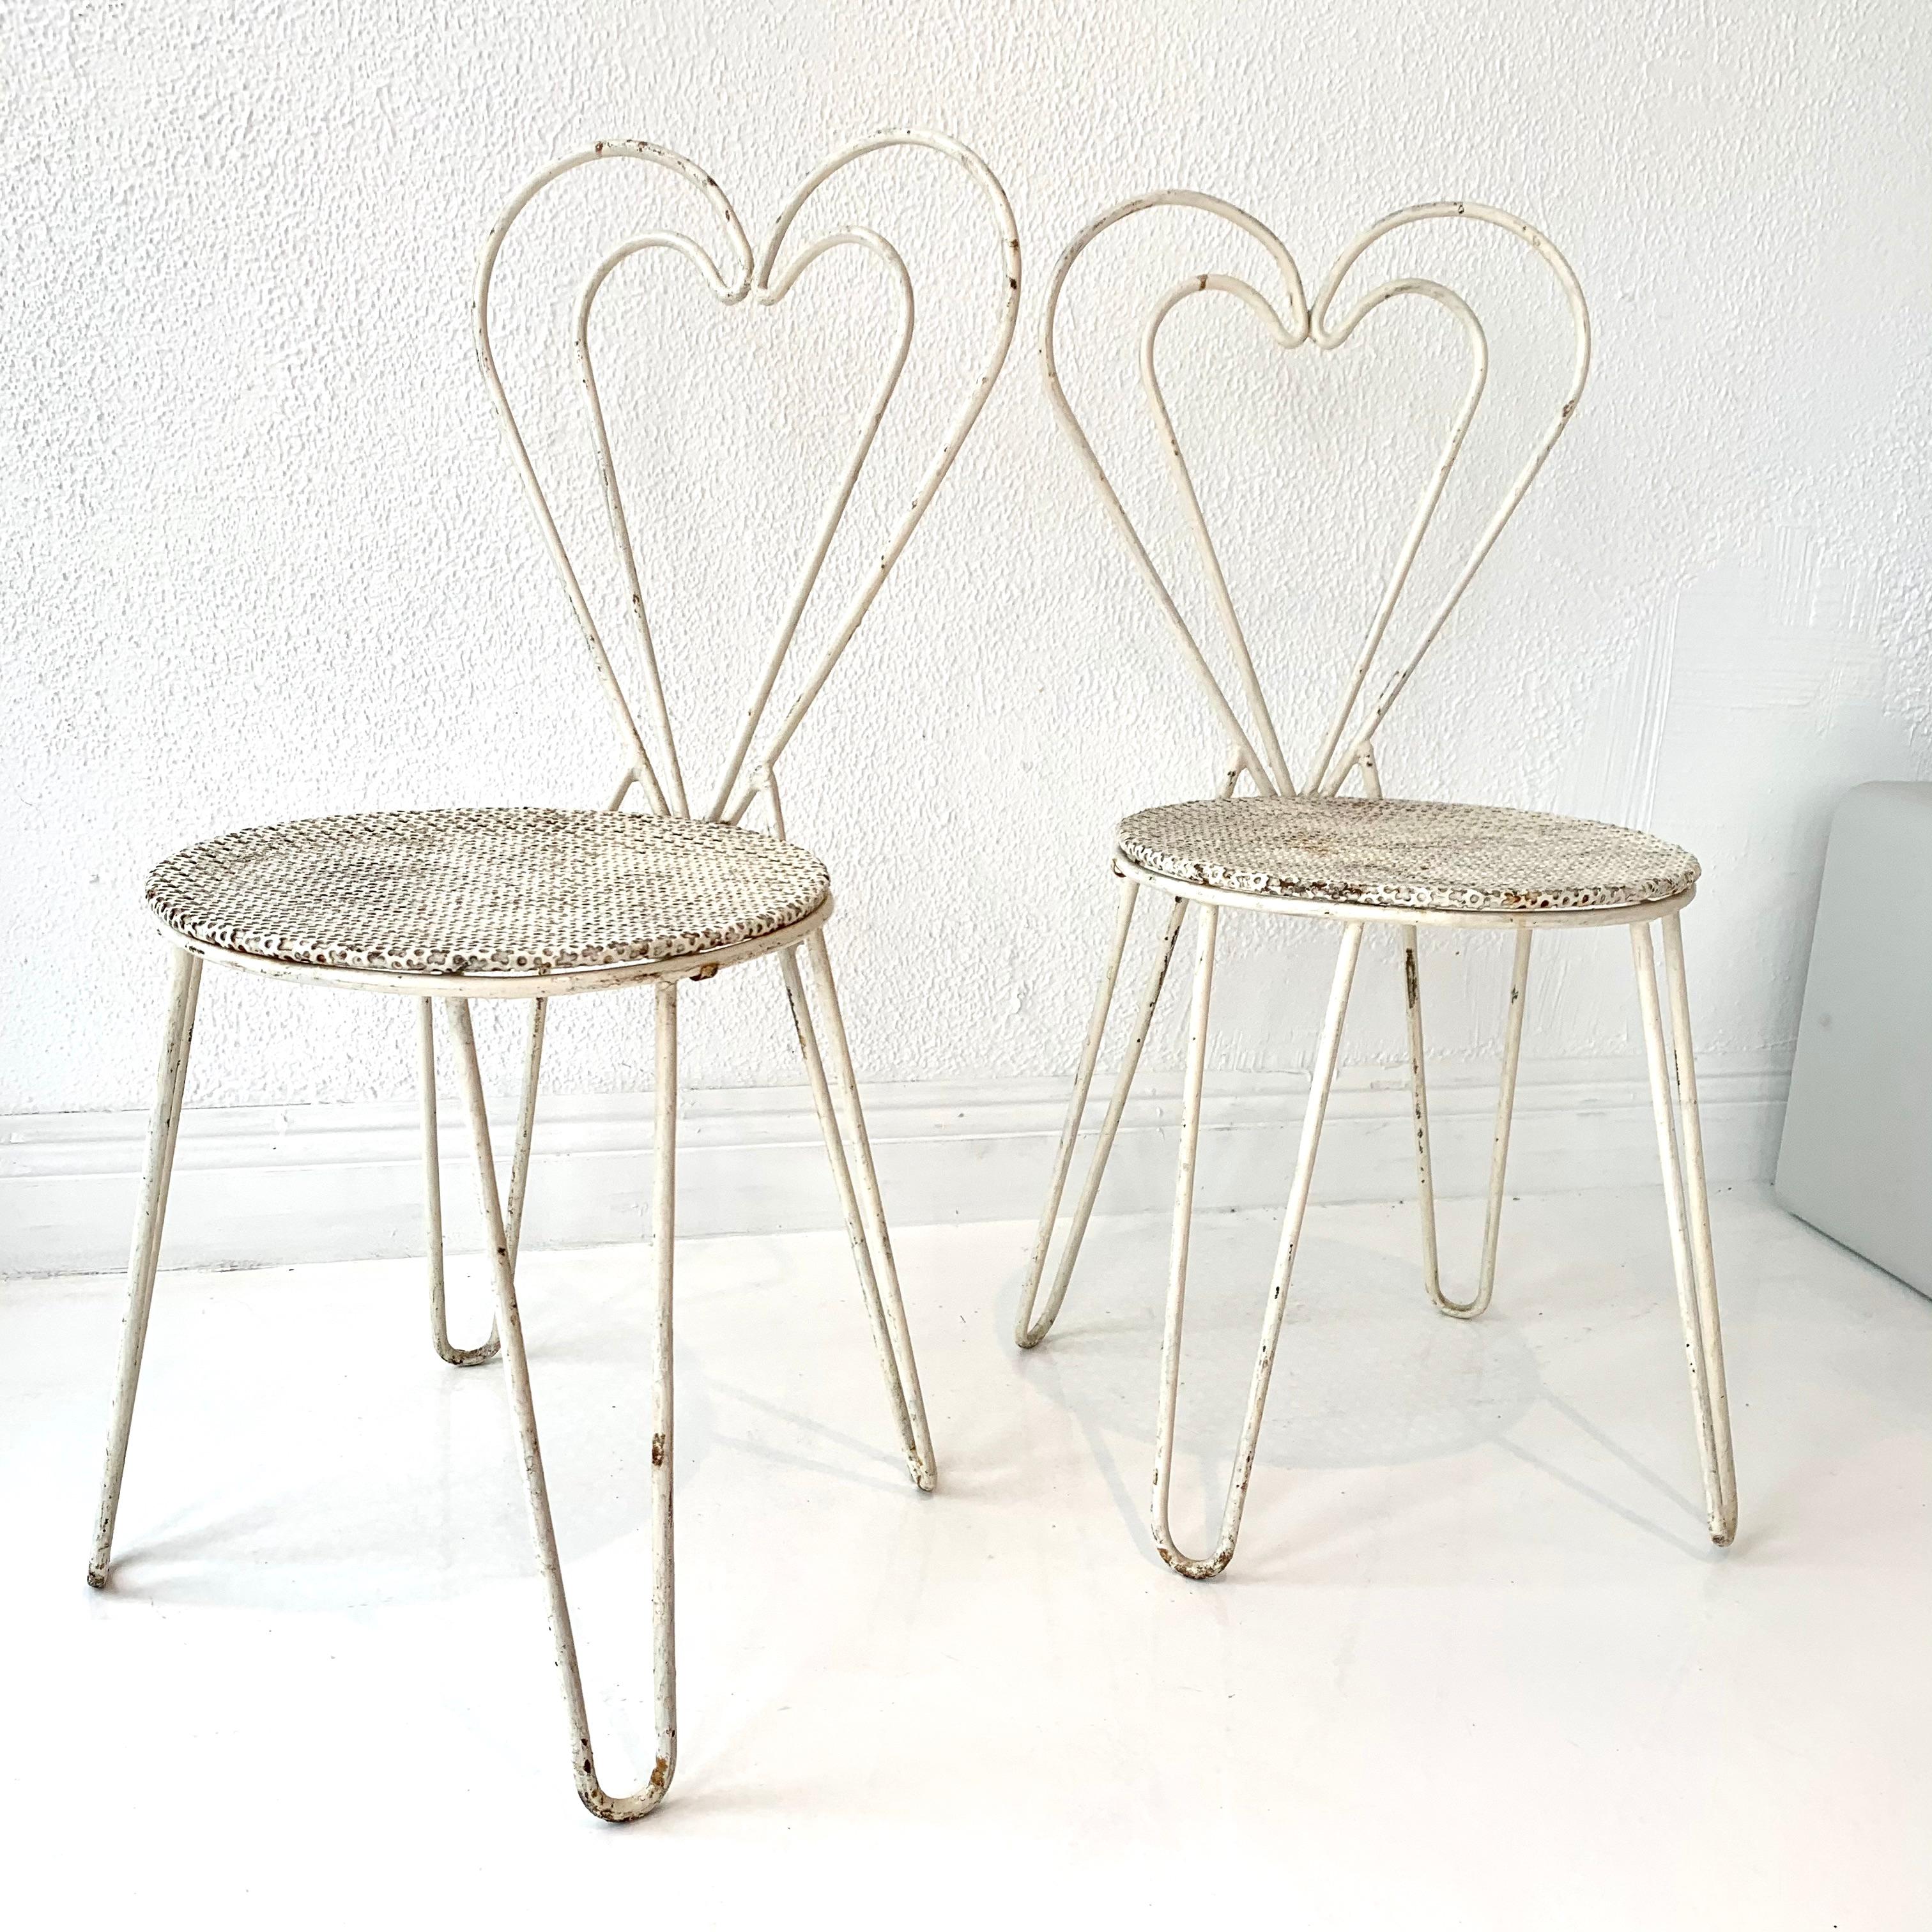 Rare metal chairs by French designer Mathieu Matégot. White metal chairs with hairpin legs, signature Mategot perforated metal seat and heart shaped backrest. Priced as a set of 6. Great vintage condition. 






  